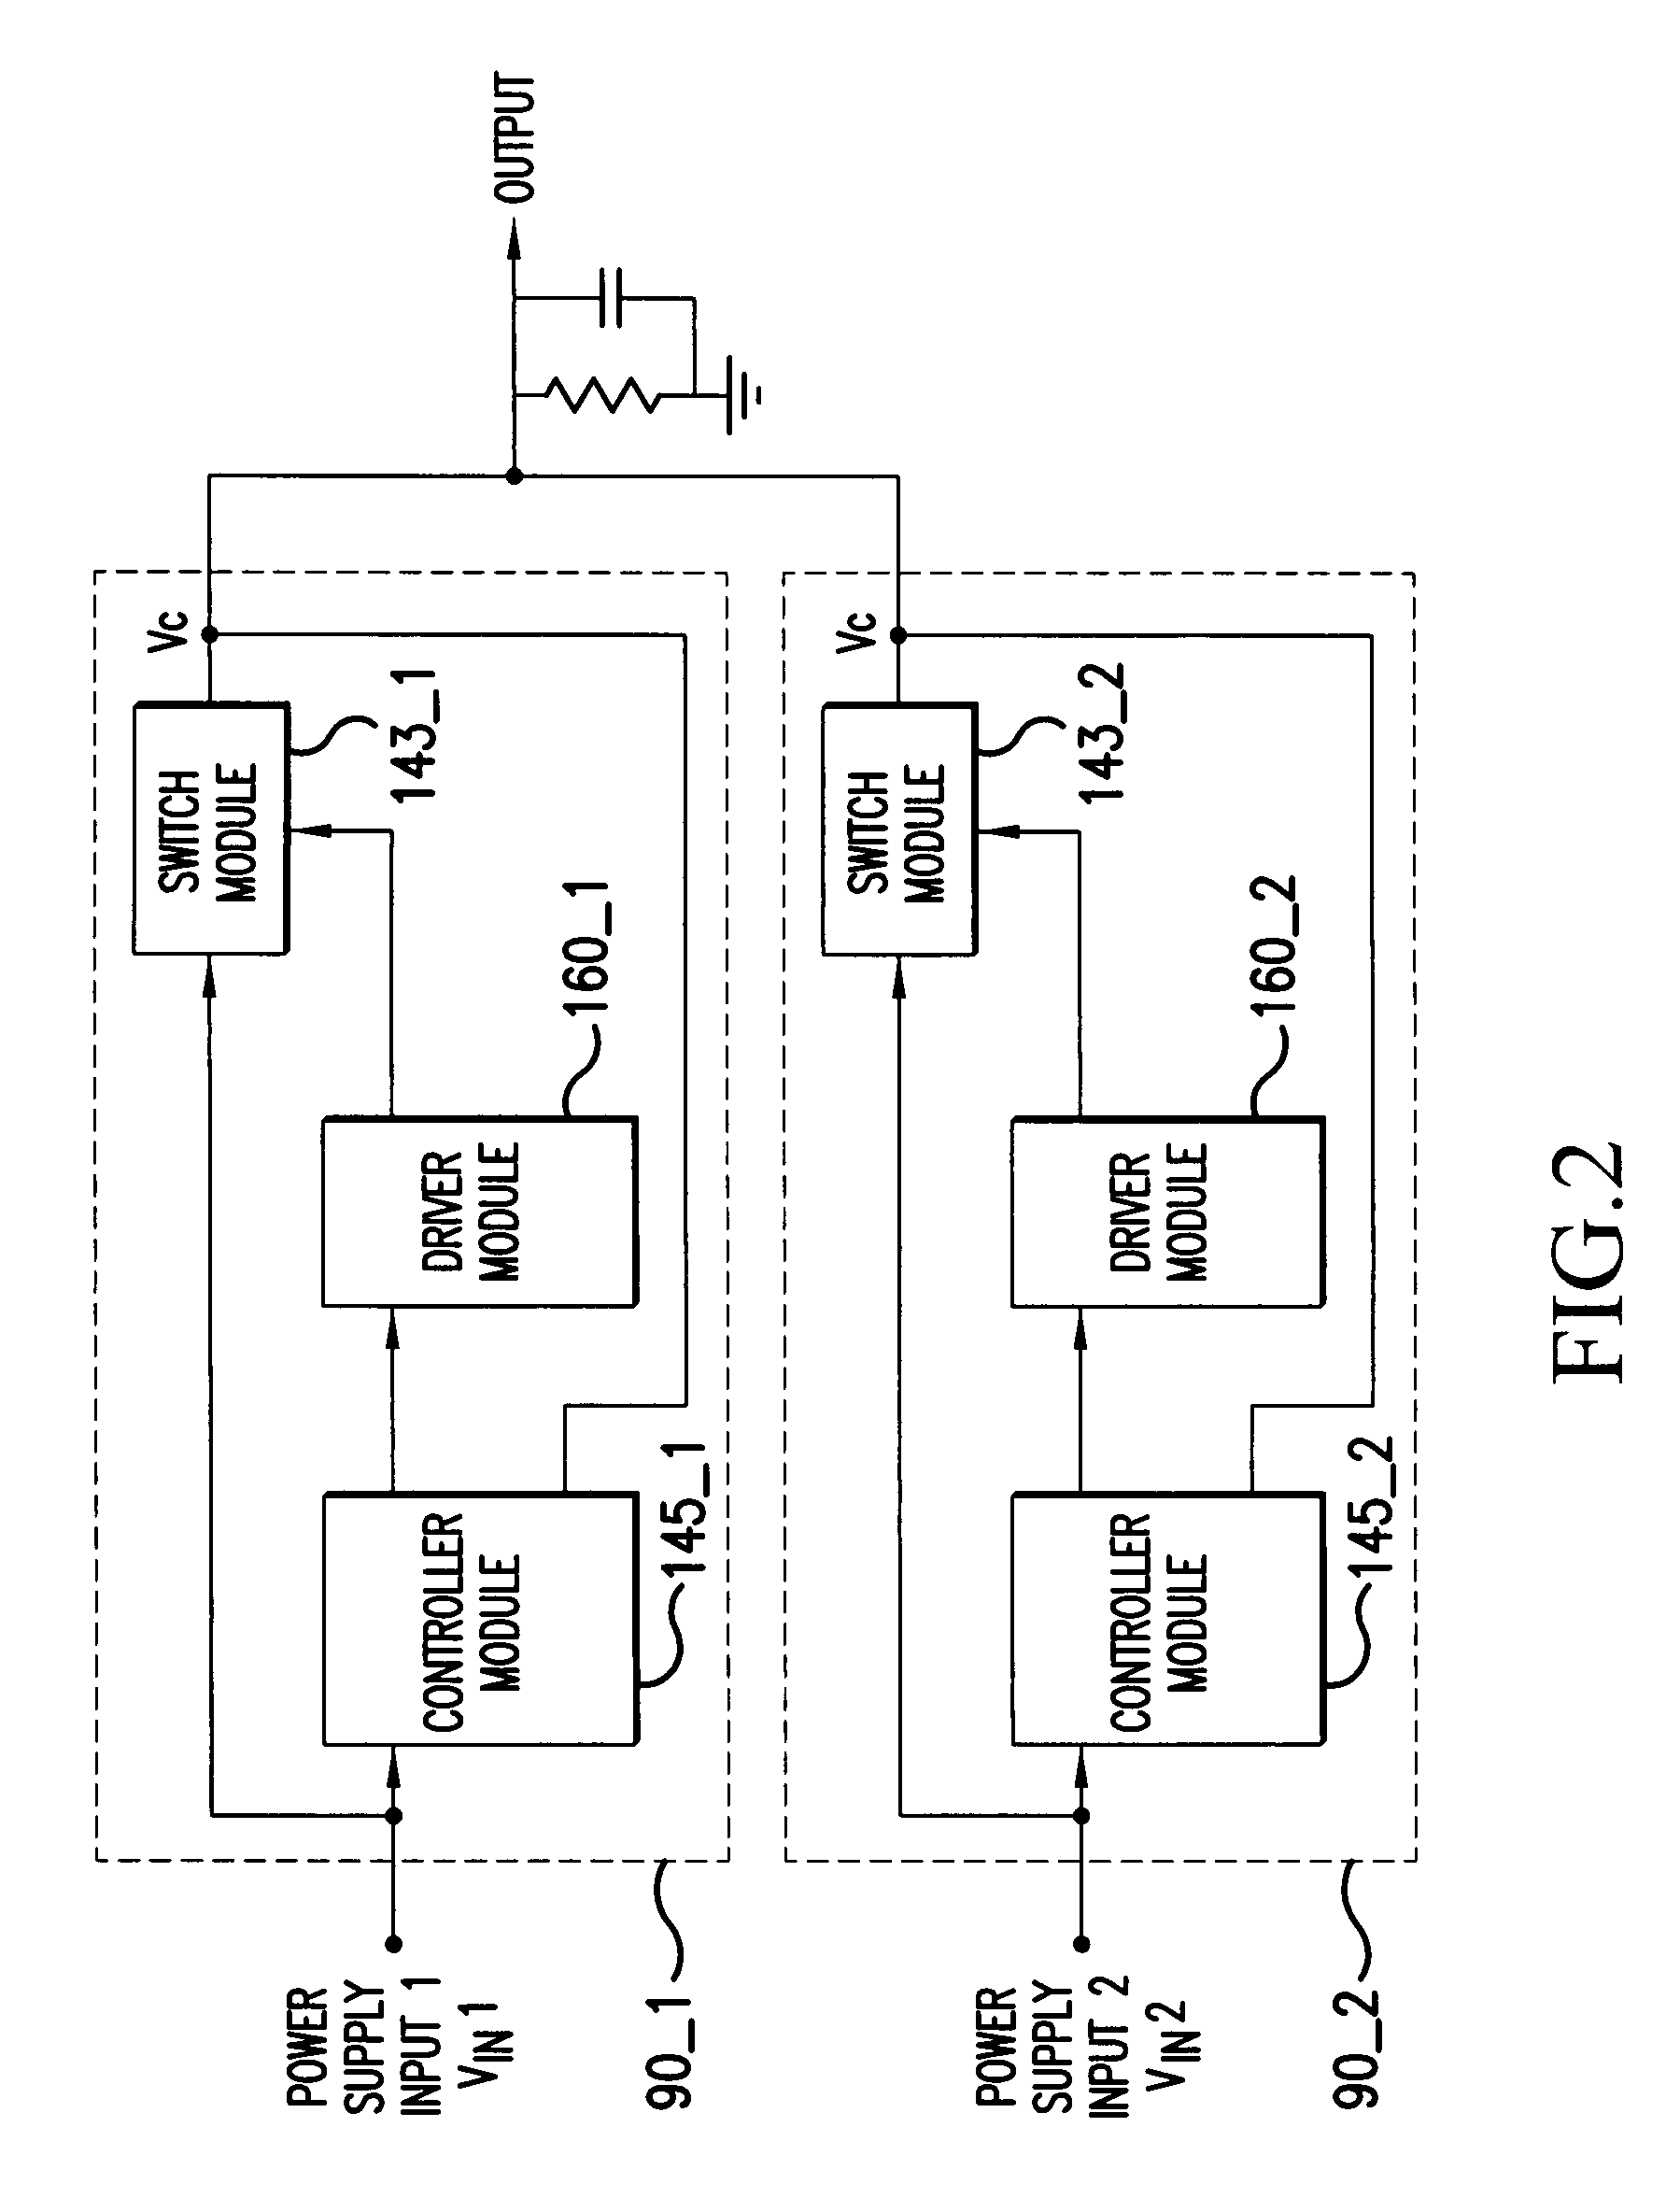 Method and apparatus for integrated active-diode-ORing and soft power switching